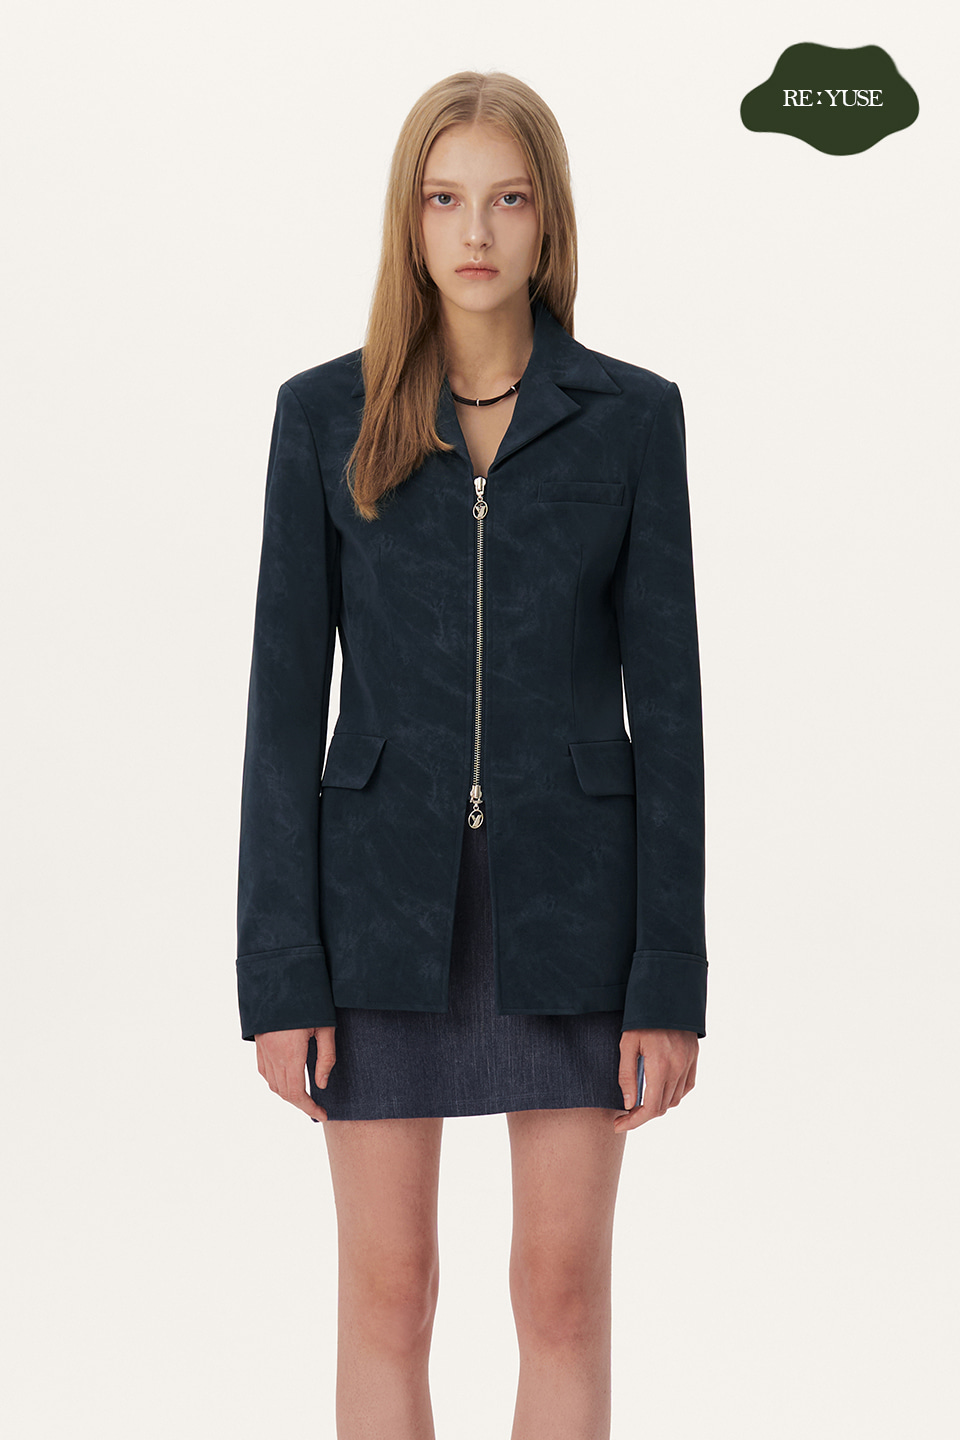 SOFT LEATHER FRONT ZIP JACKET - NAVY